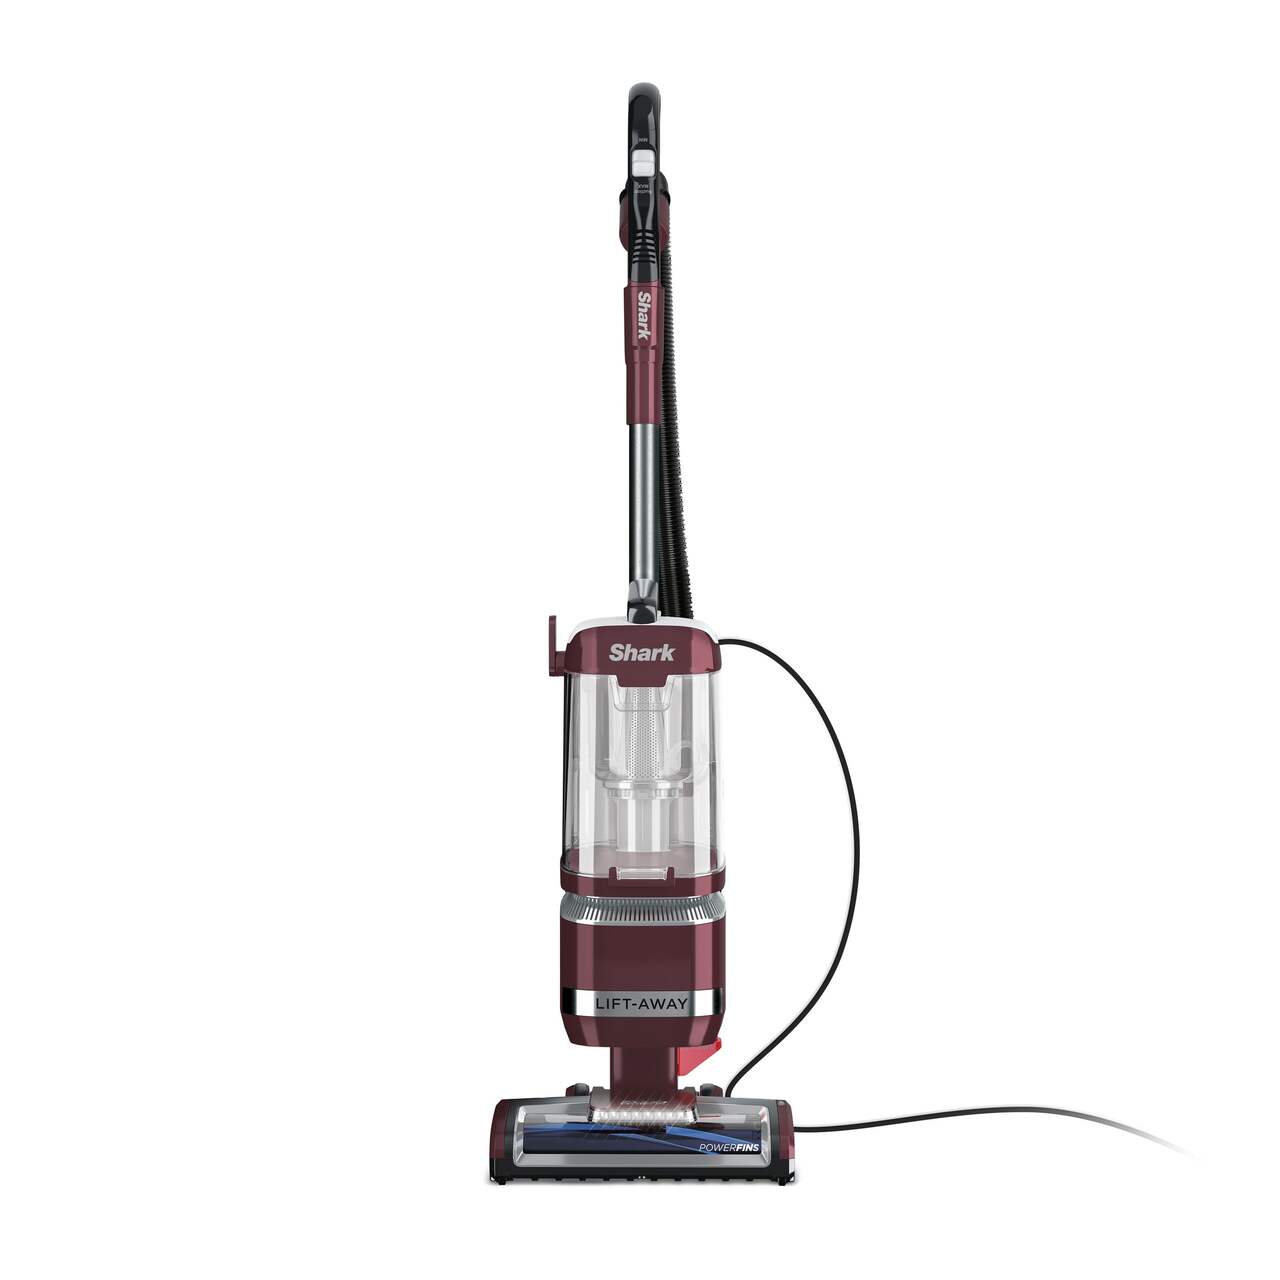 https://media-www.canadiantire.ca/product/living/cleaning/vacuums-and-floorcare/0439465/shark-rotator-lift-away-upright-vacuum-with-powerfins-1335152f-4239-451f-a324-403b7eae56e5-jpgrendition.jpg?imdensity=1&imwidth=1244&impolicy=mZoom